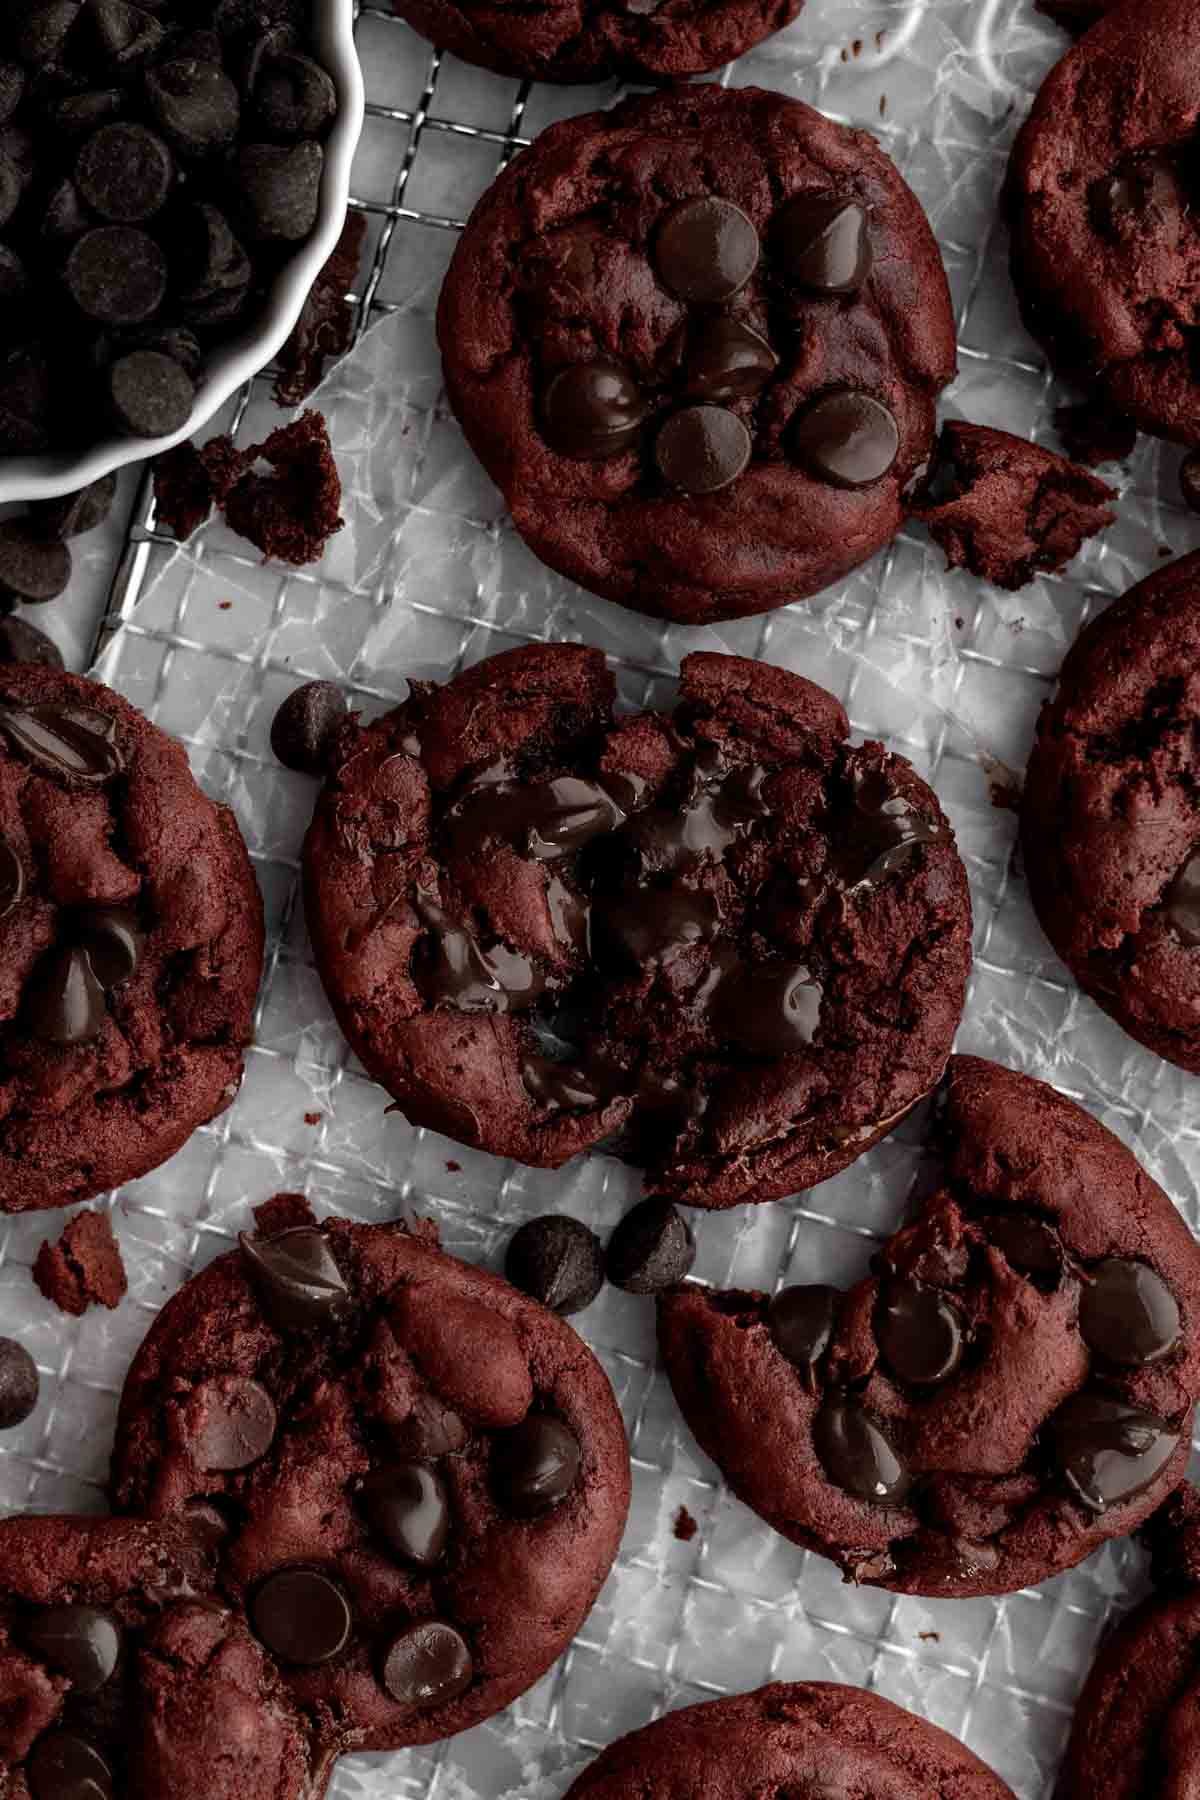 Hot gooey chocolate spreads from this divided Red Velvet Chocolate Chip Cookie.